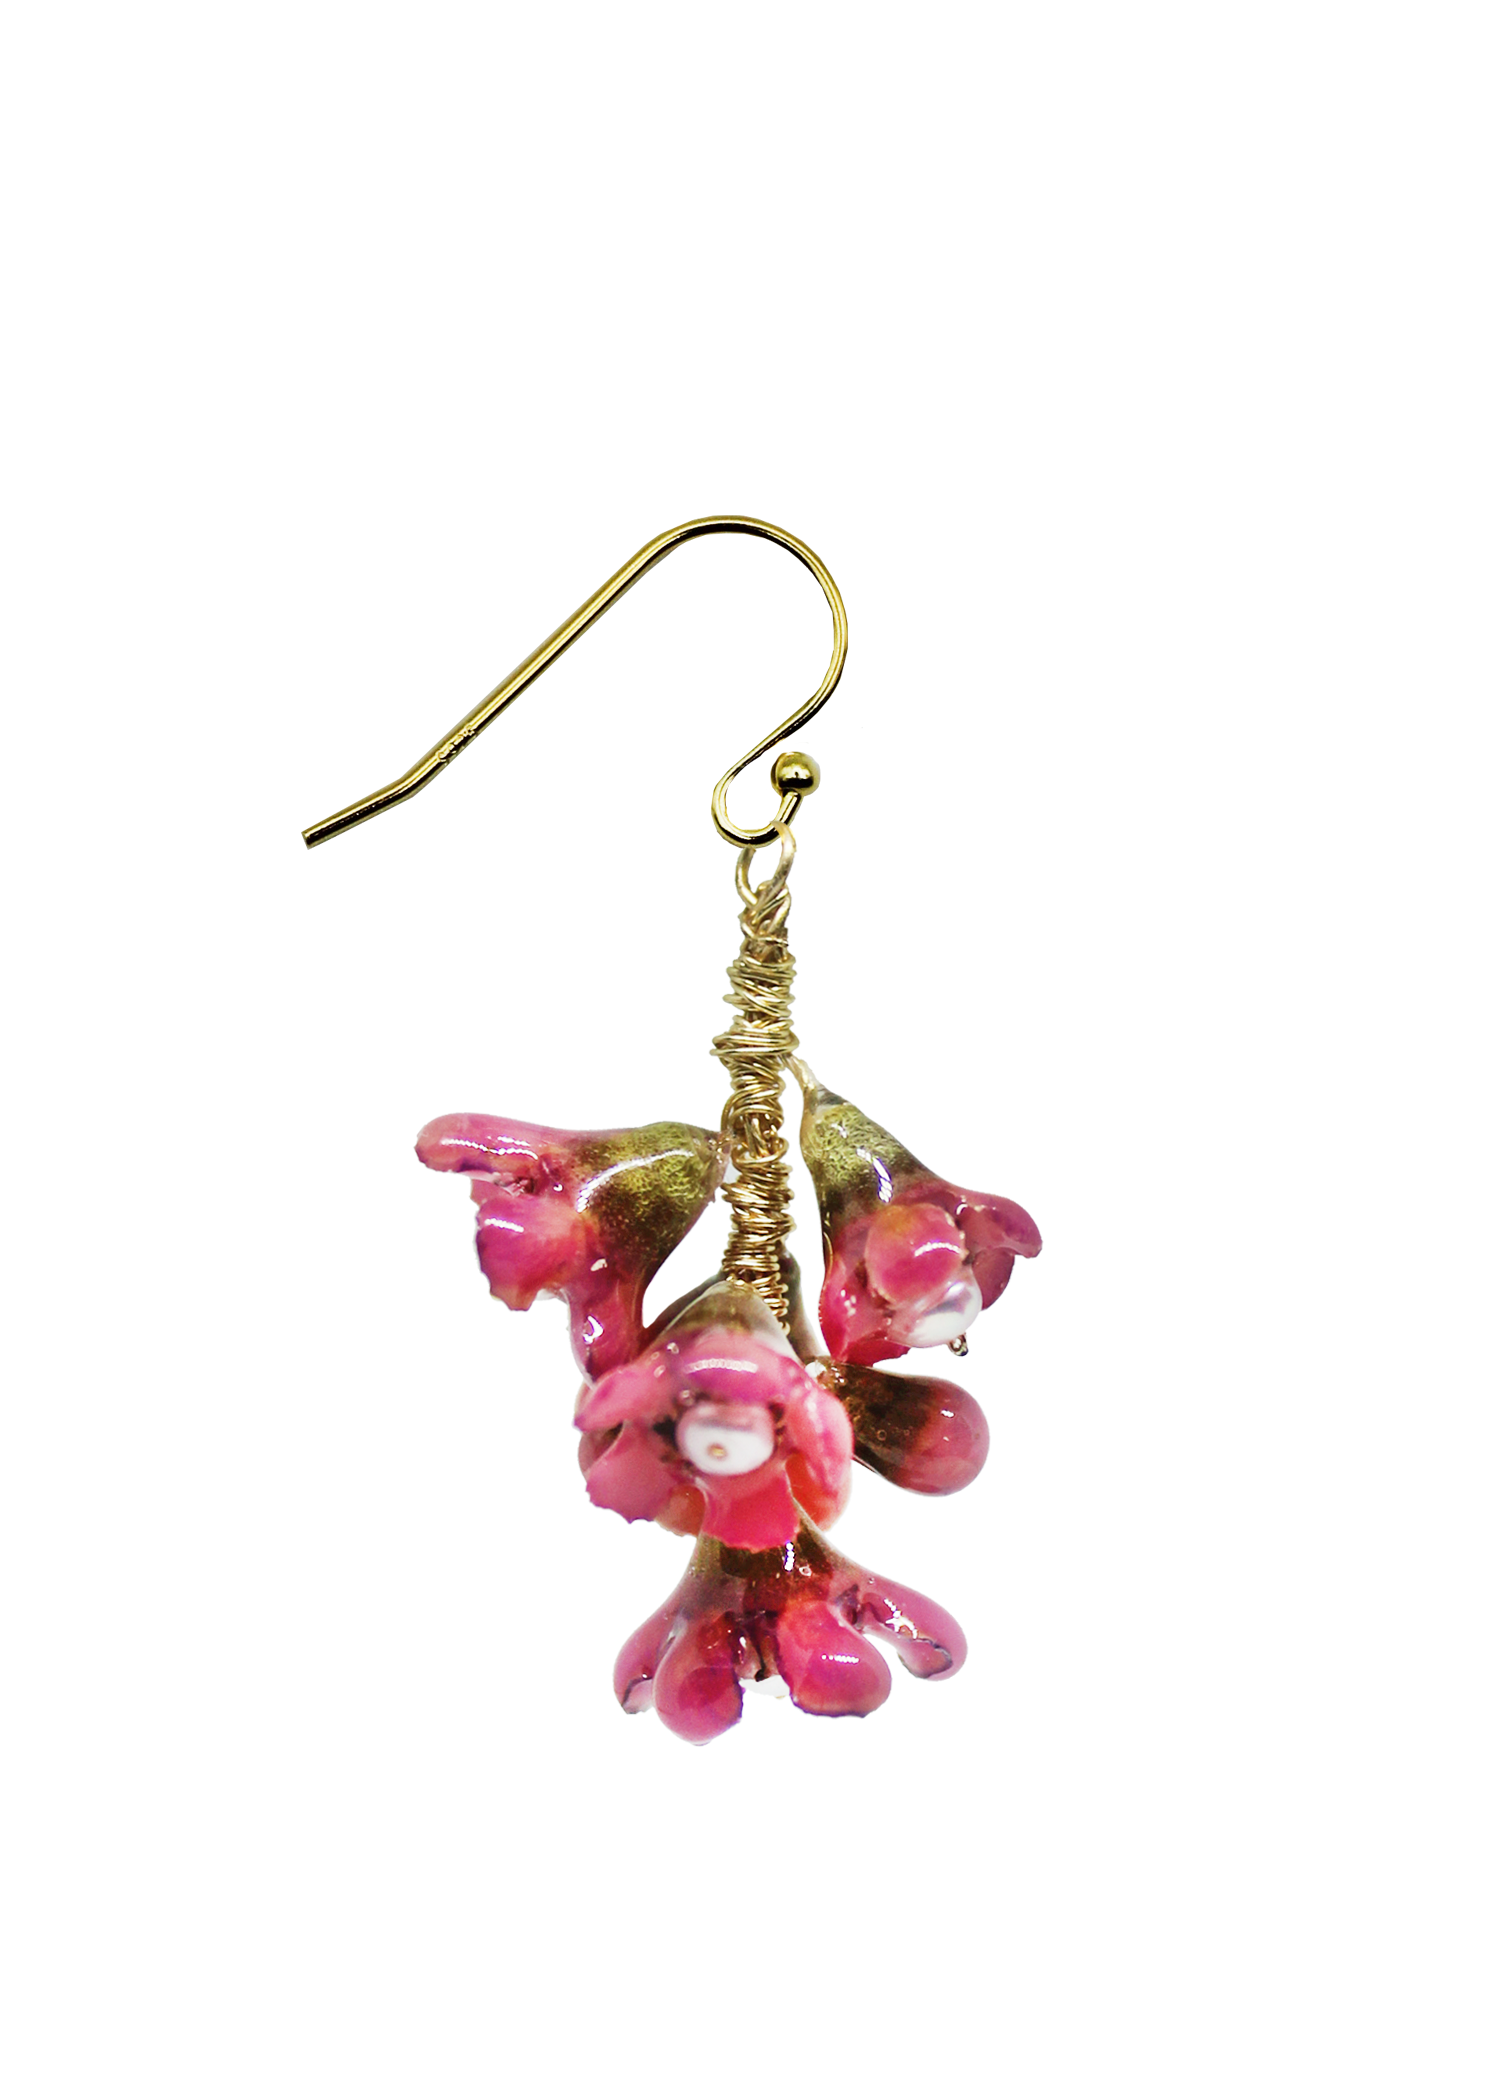 Resin Coated Pink Manuka Flowers in a Chandelier Formation on a French Hook